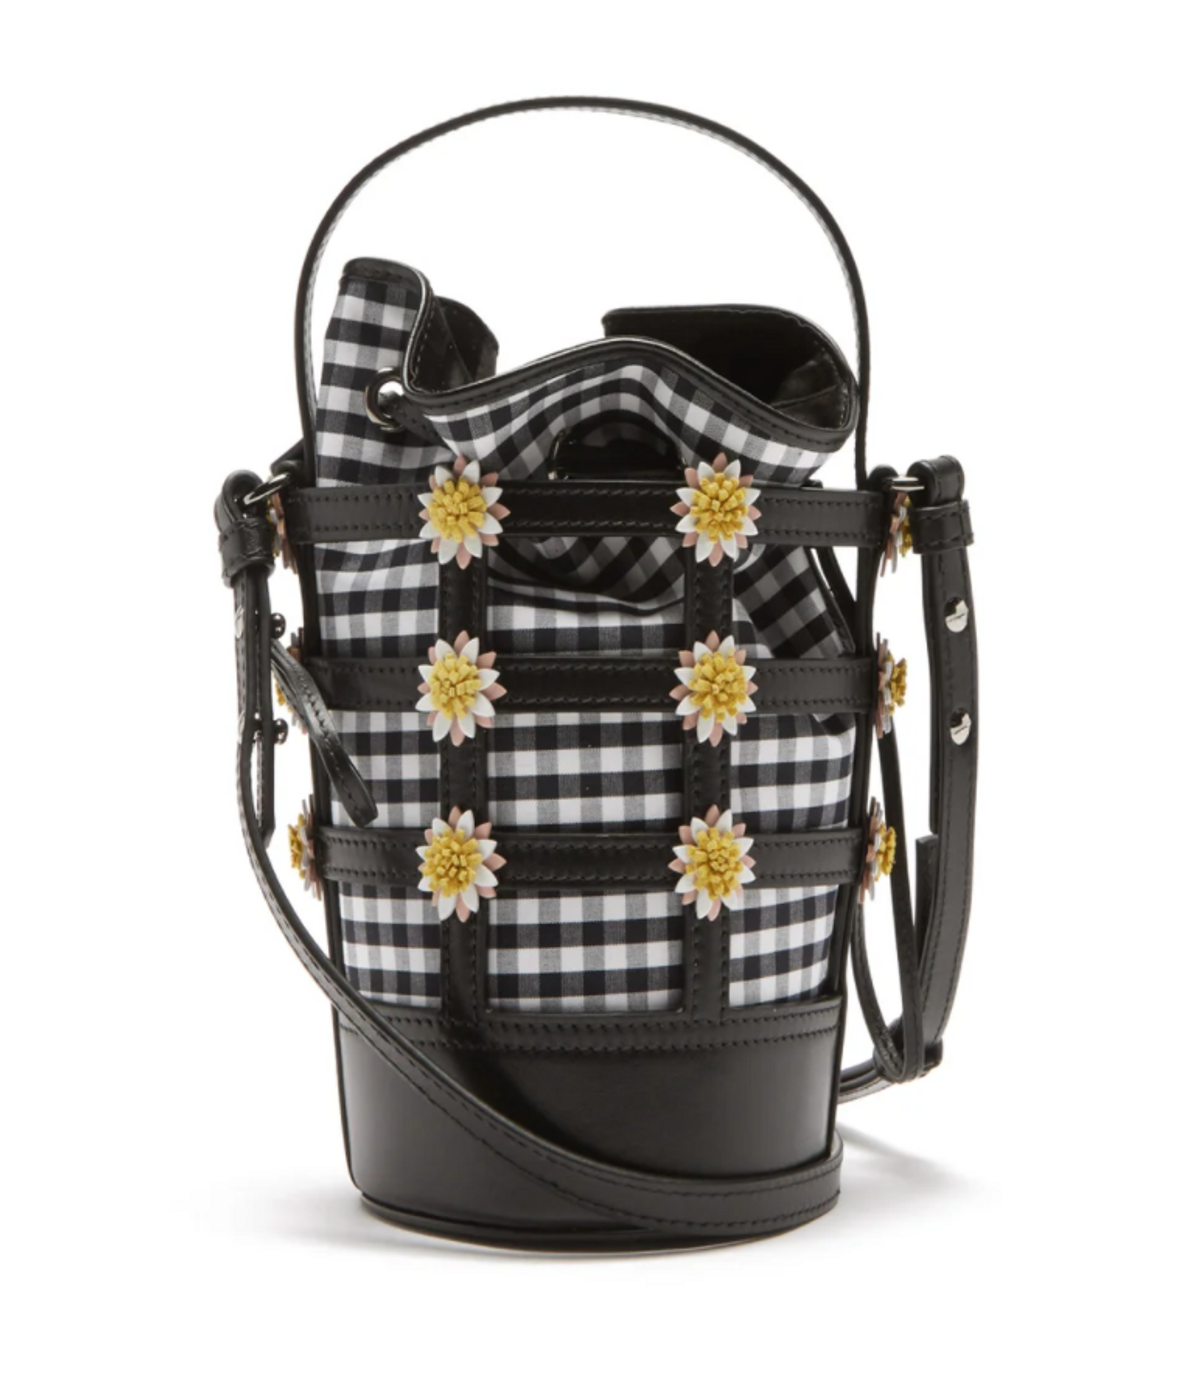 Miss Daisy Leather and Gingham Bucket Bag